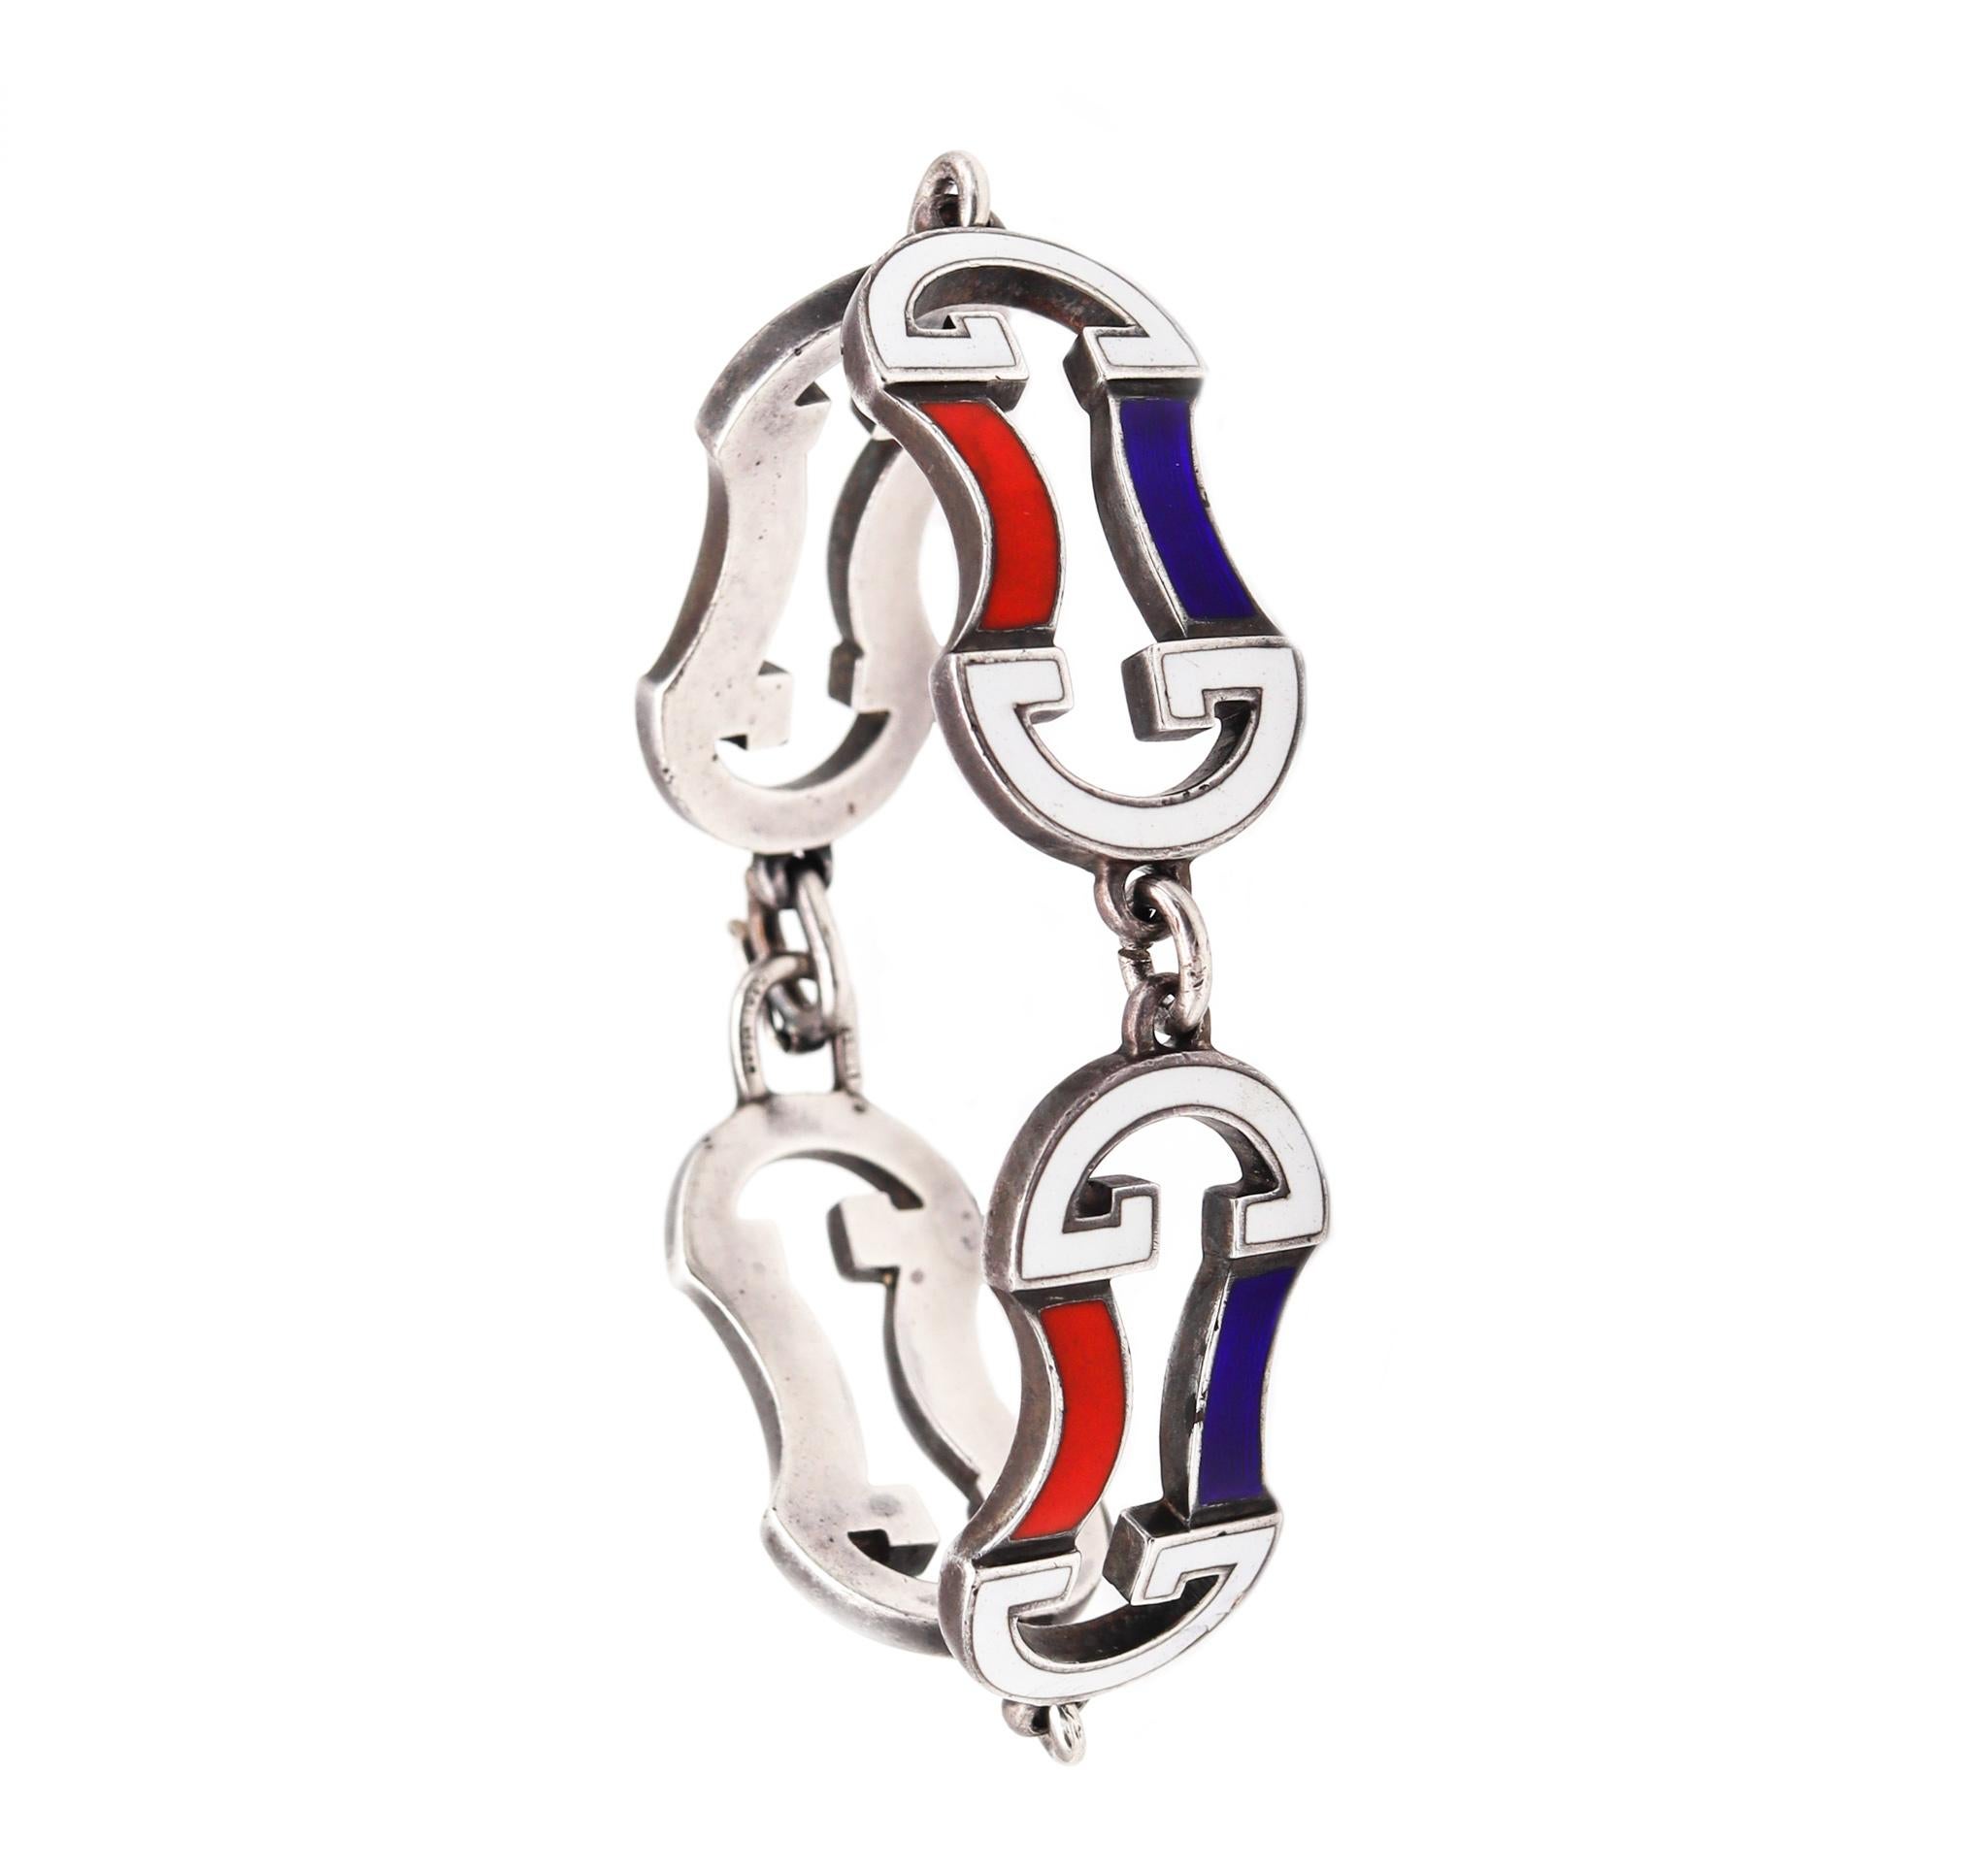 A colorful G bracelet designed by Gucci.

Unusual vintage piece, created in Florence Italy by the fashion house of Gucci, back in the 1970. This bracelet is very rare and has been carefully crafted in solid .925/.999 sterling silver, with high